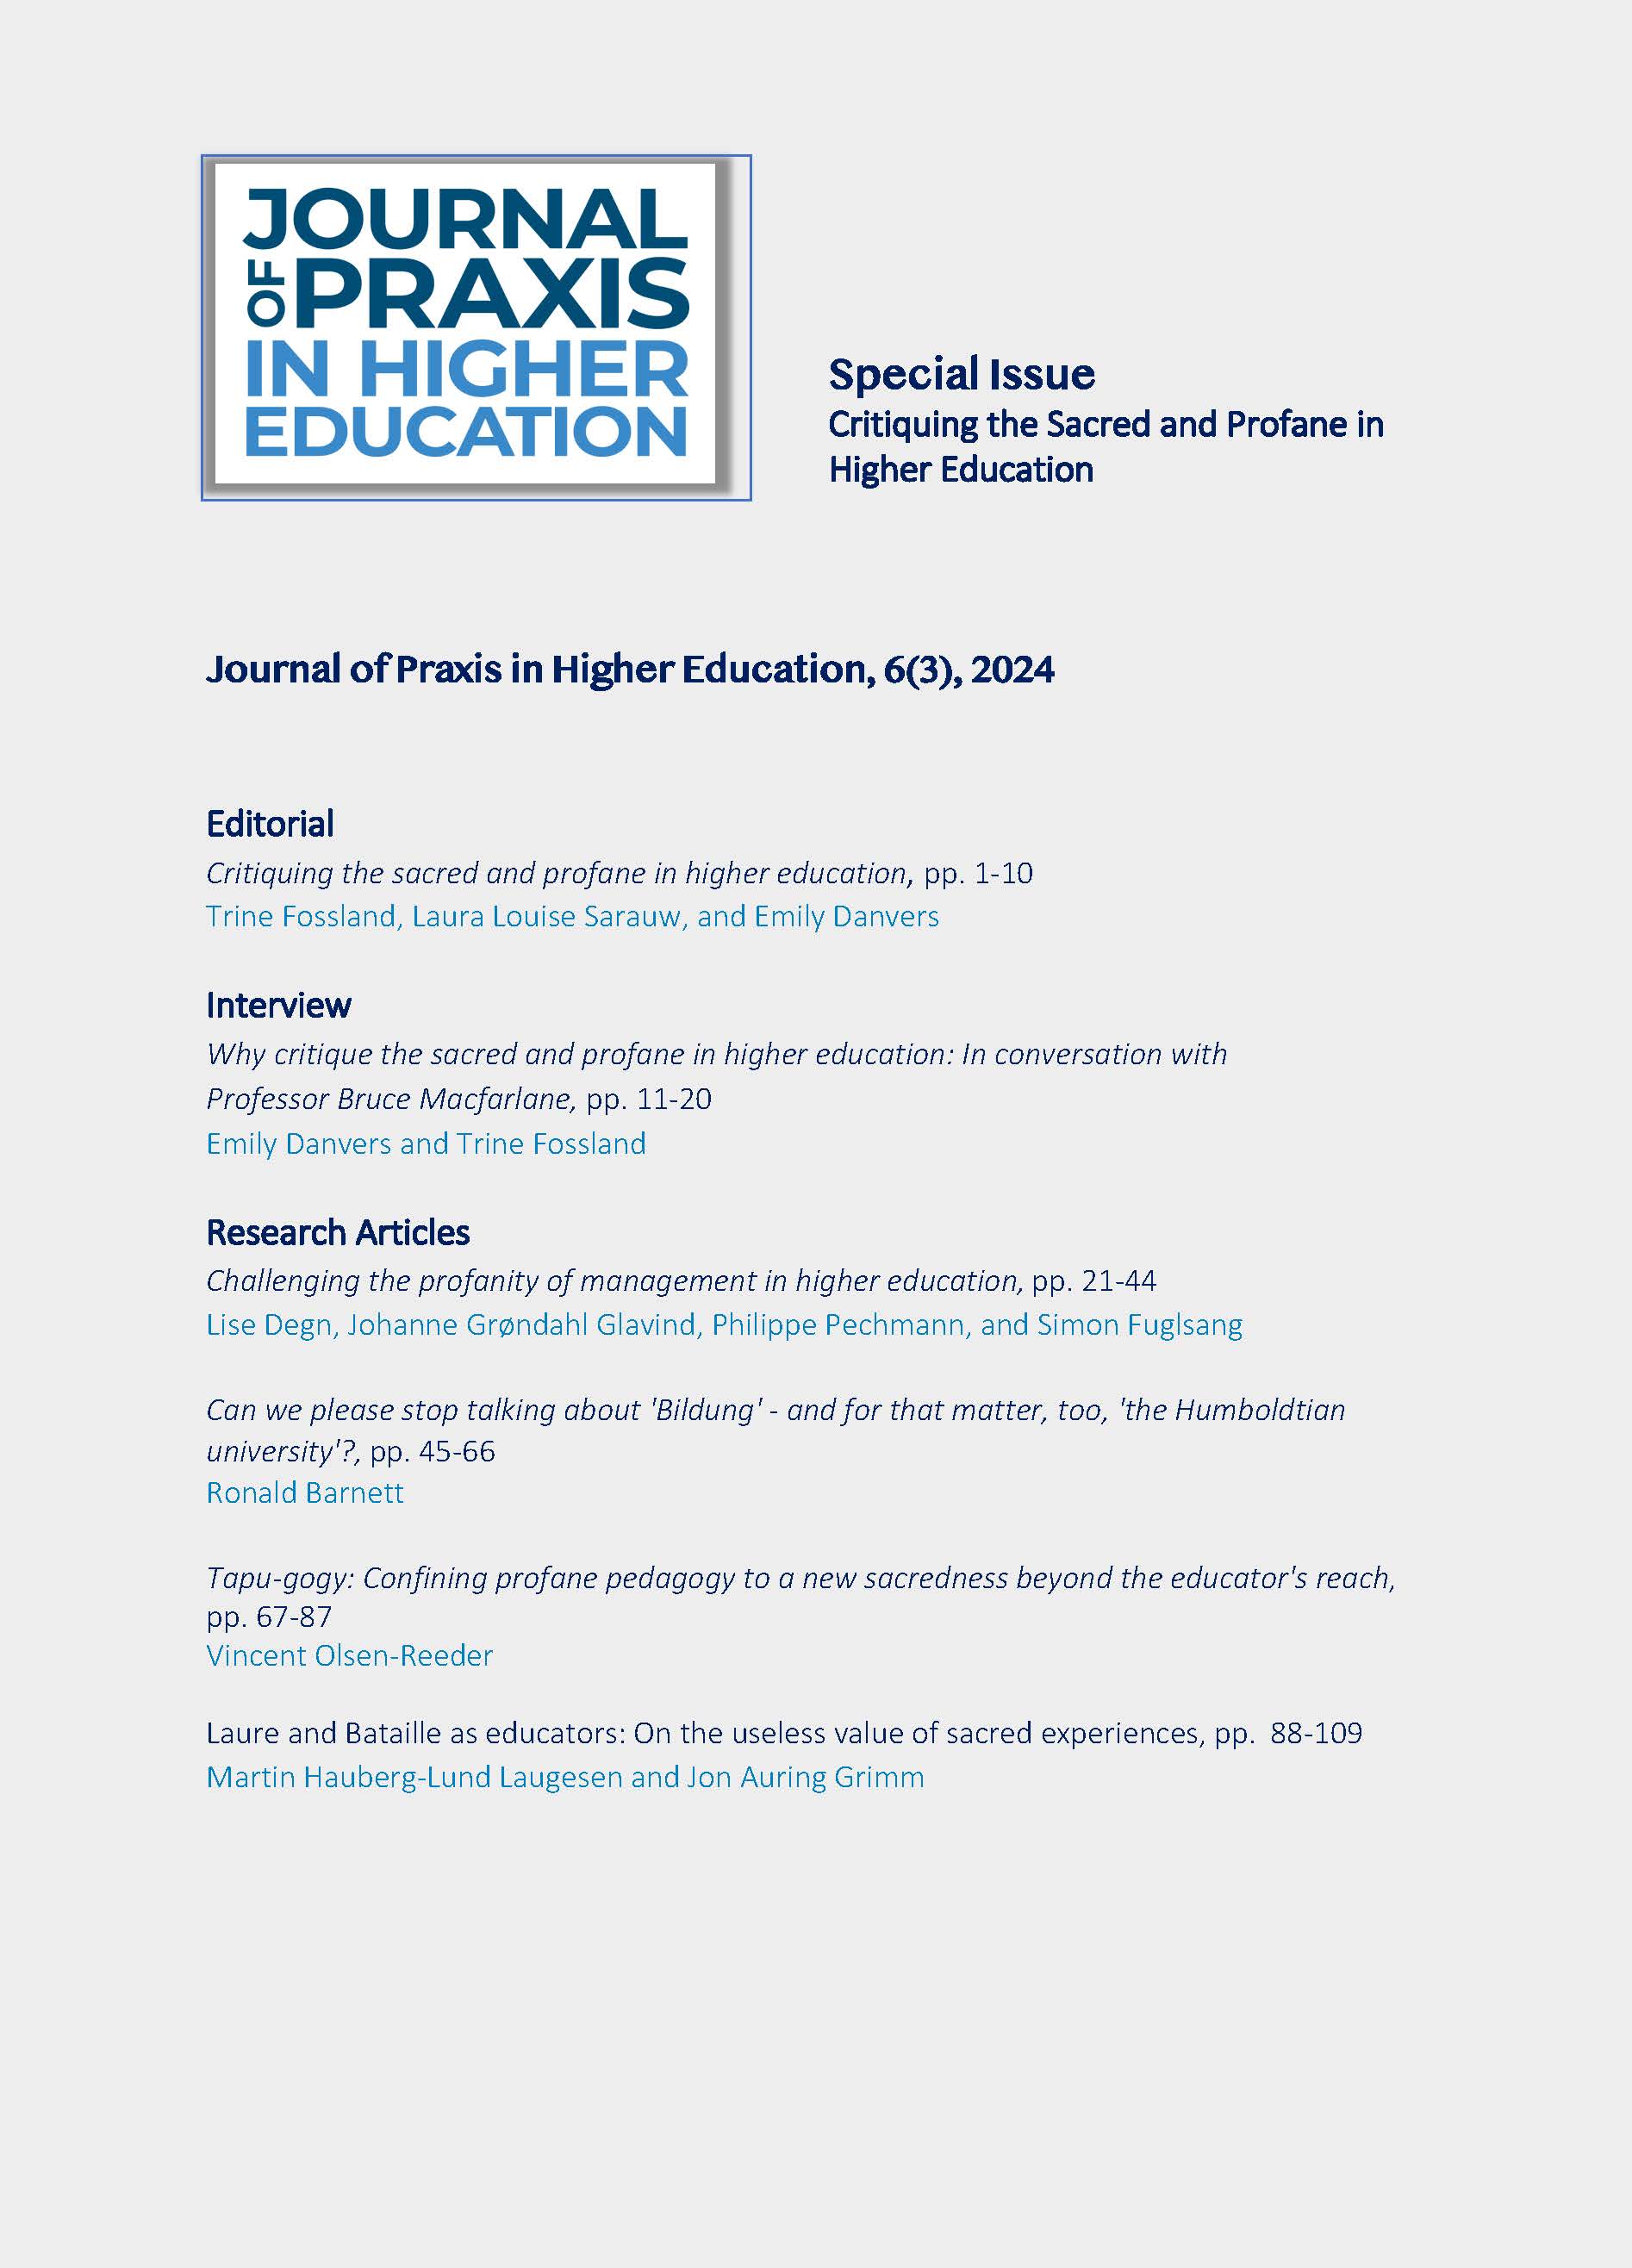 					View Vol. 6 No. 3 (2024): Special Issue: Critiquing the Sacred and Profane in Higher Education
				